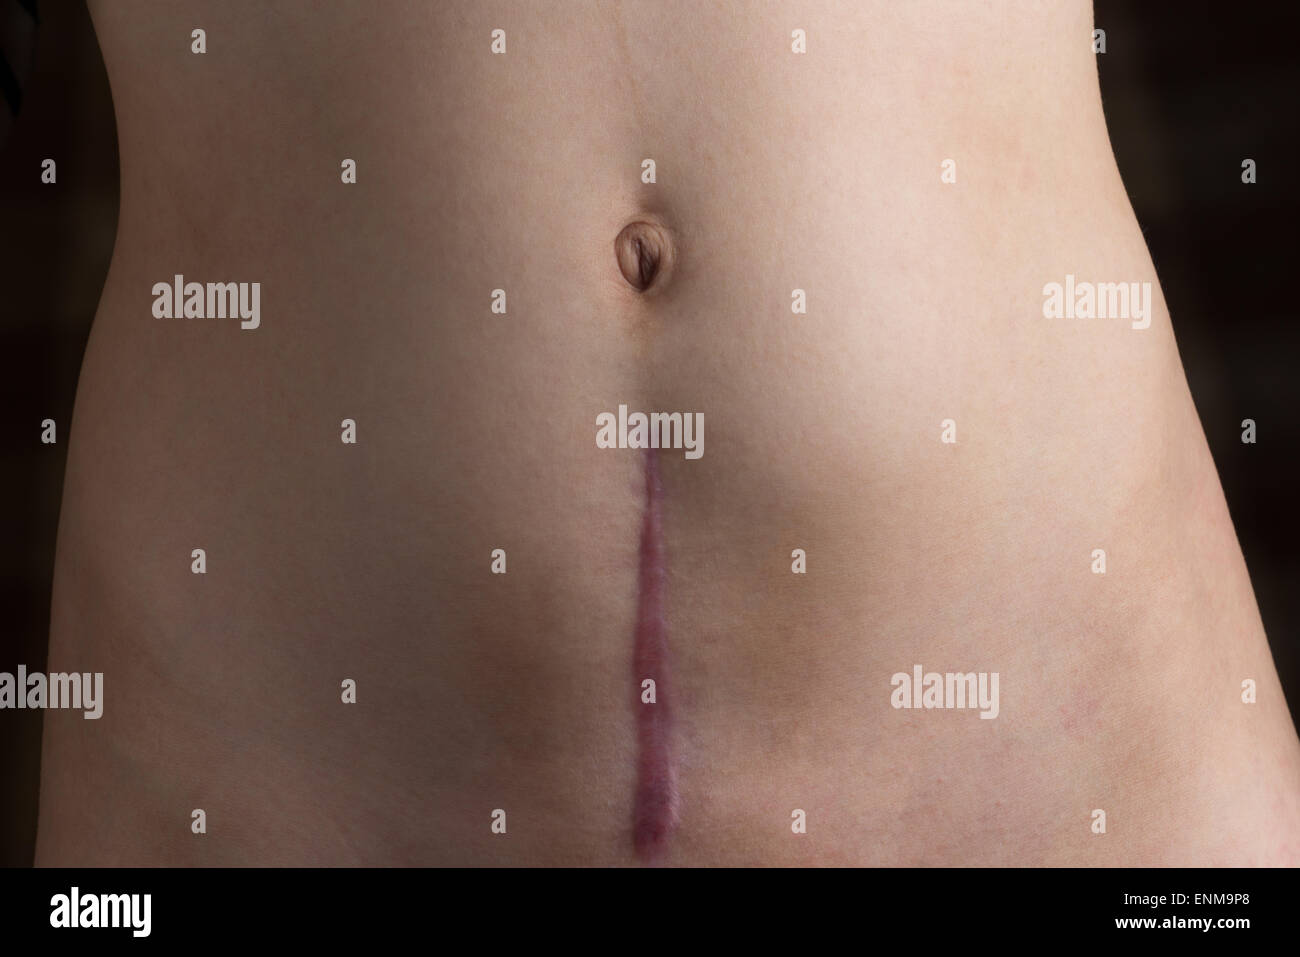 A recovering scar from a c-section operation. Stock Photo